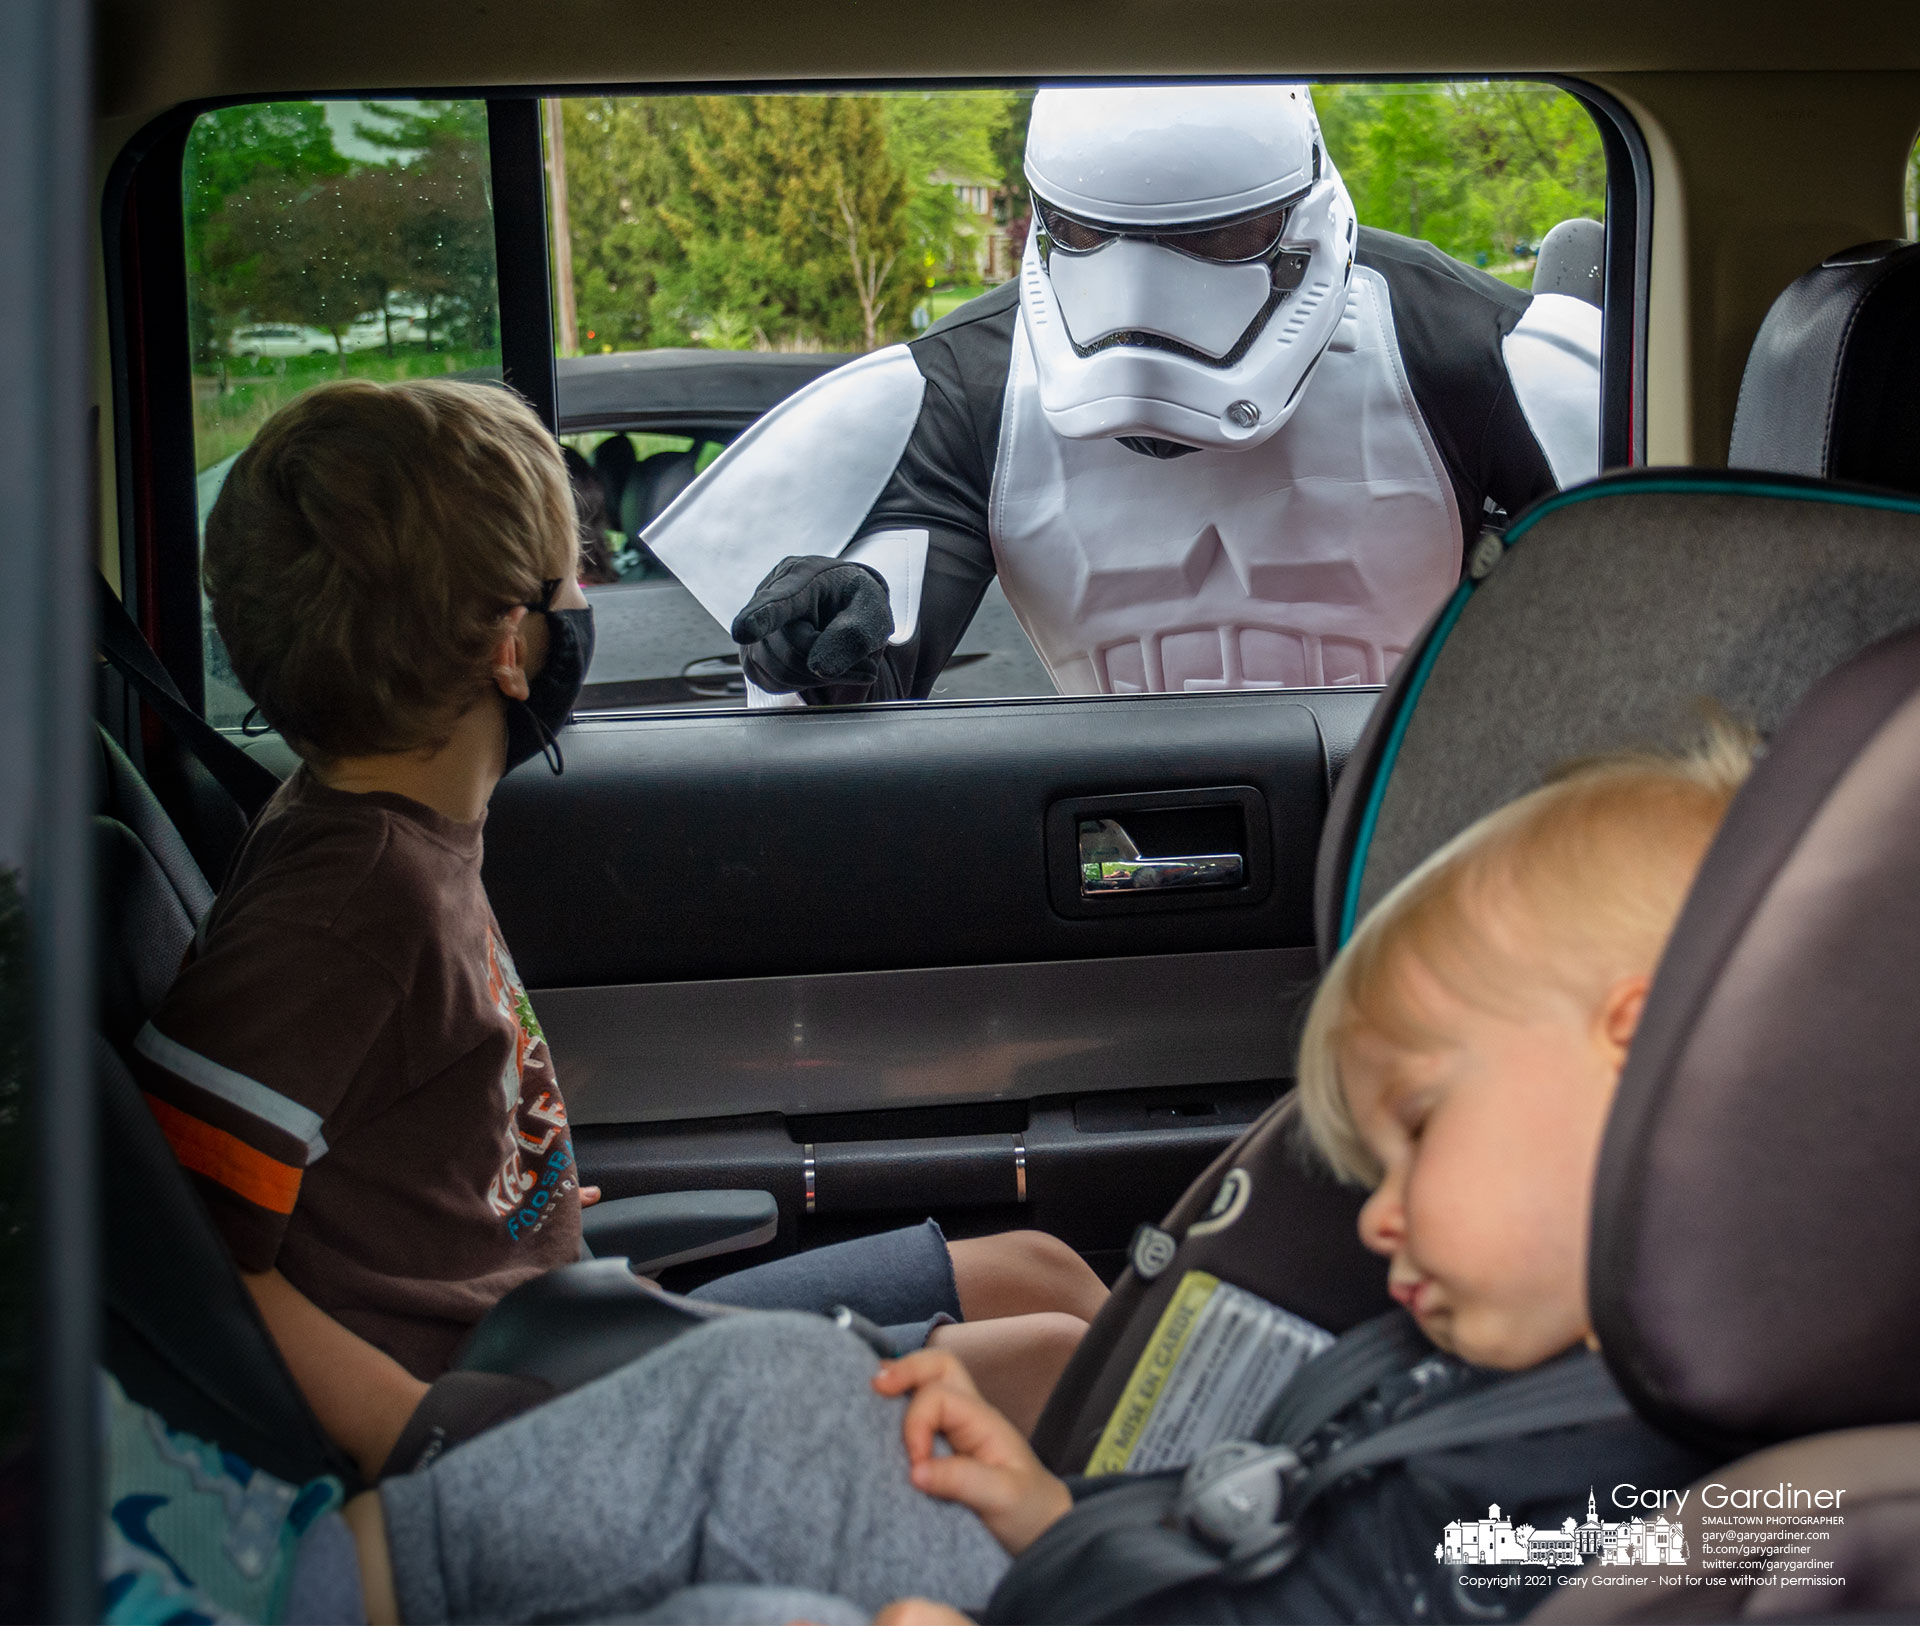 While an Imperial Stormtrooper interrogates a backseat passenger about missing droids the second passenger elects to sleep through the May the 4th food drive-thru at Highlands benefiting WARM. My Final Photo for May 4, 2021.